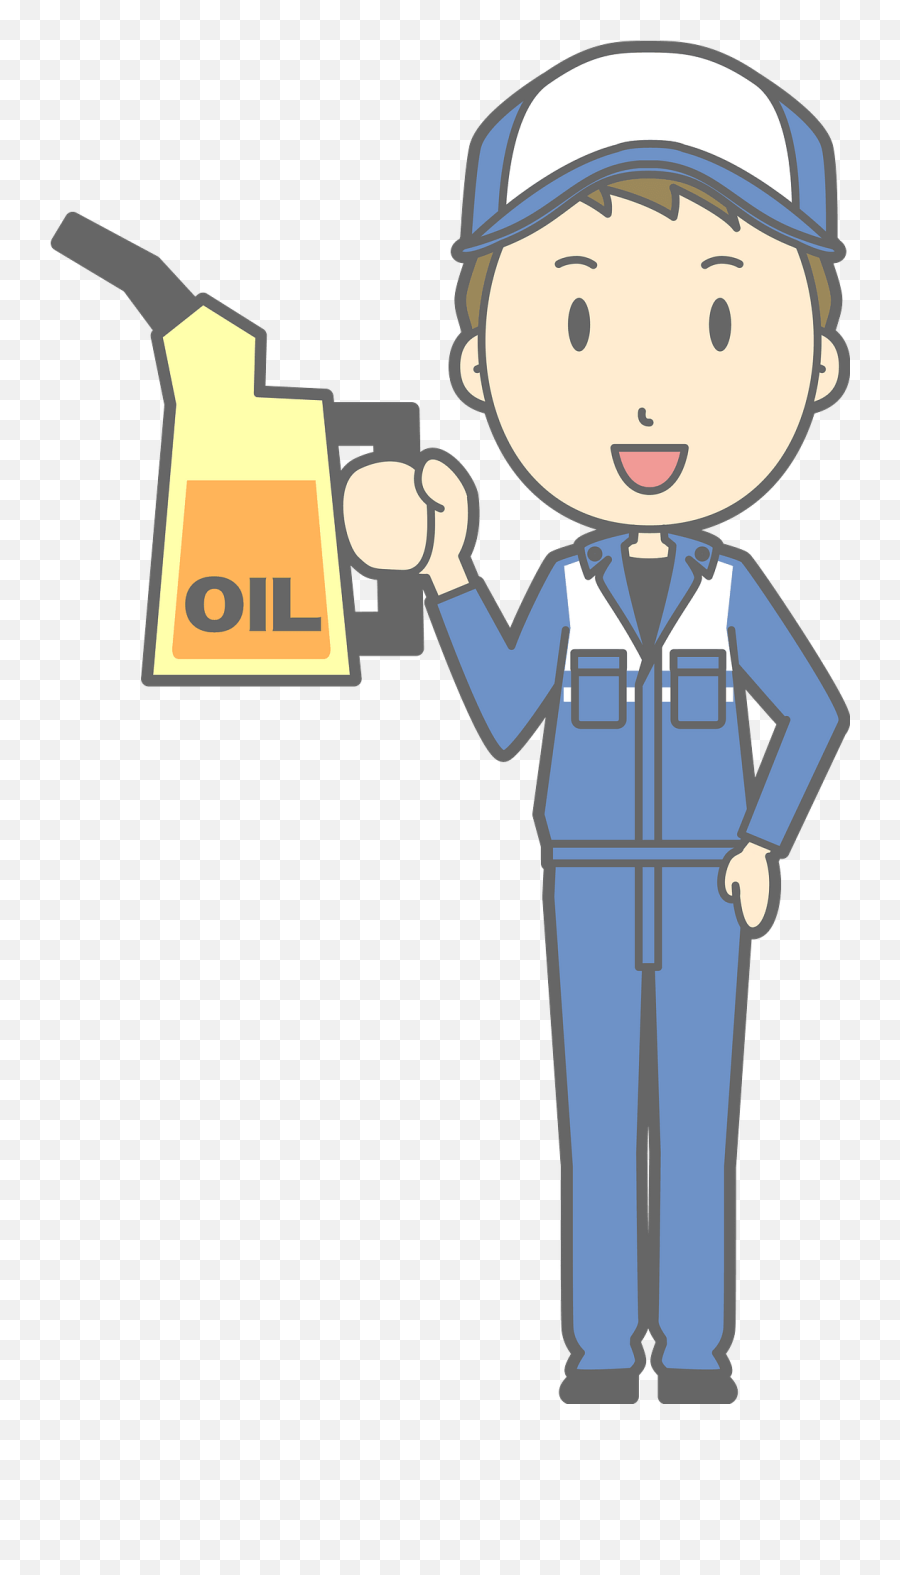 Todd Mechanic Man Is Holding An Oil Can Clipart Free - Cartoon Man With Oil Can Emoji,Mechanic Clipart